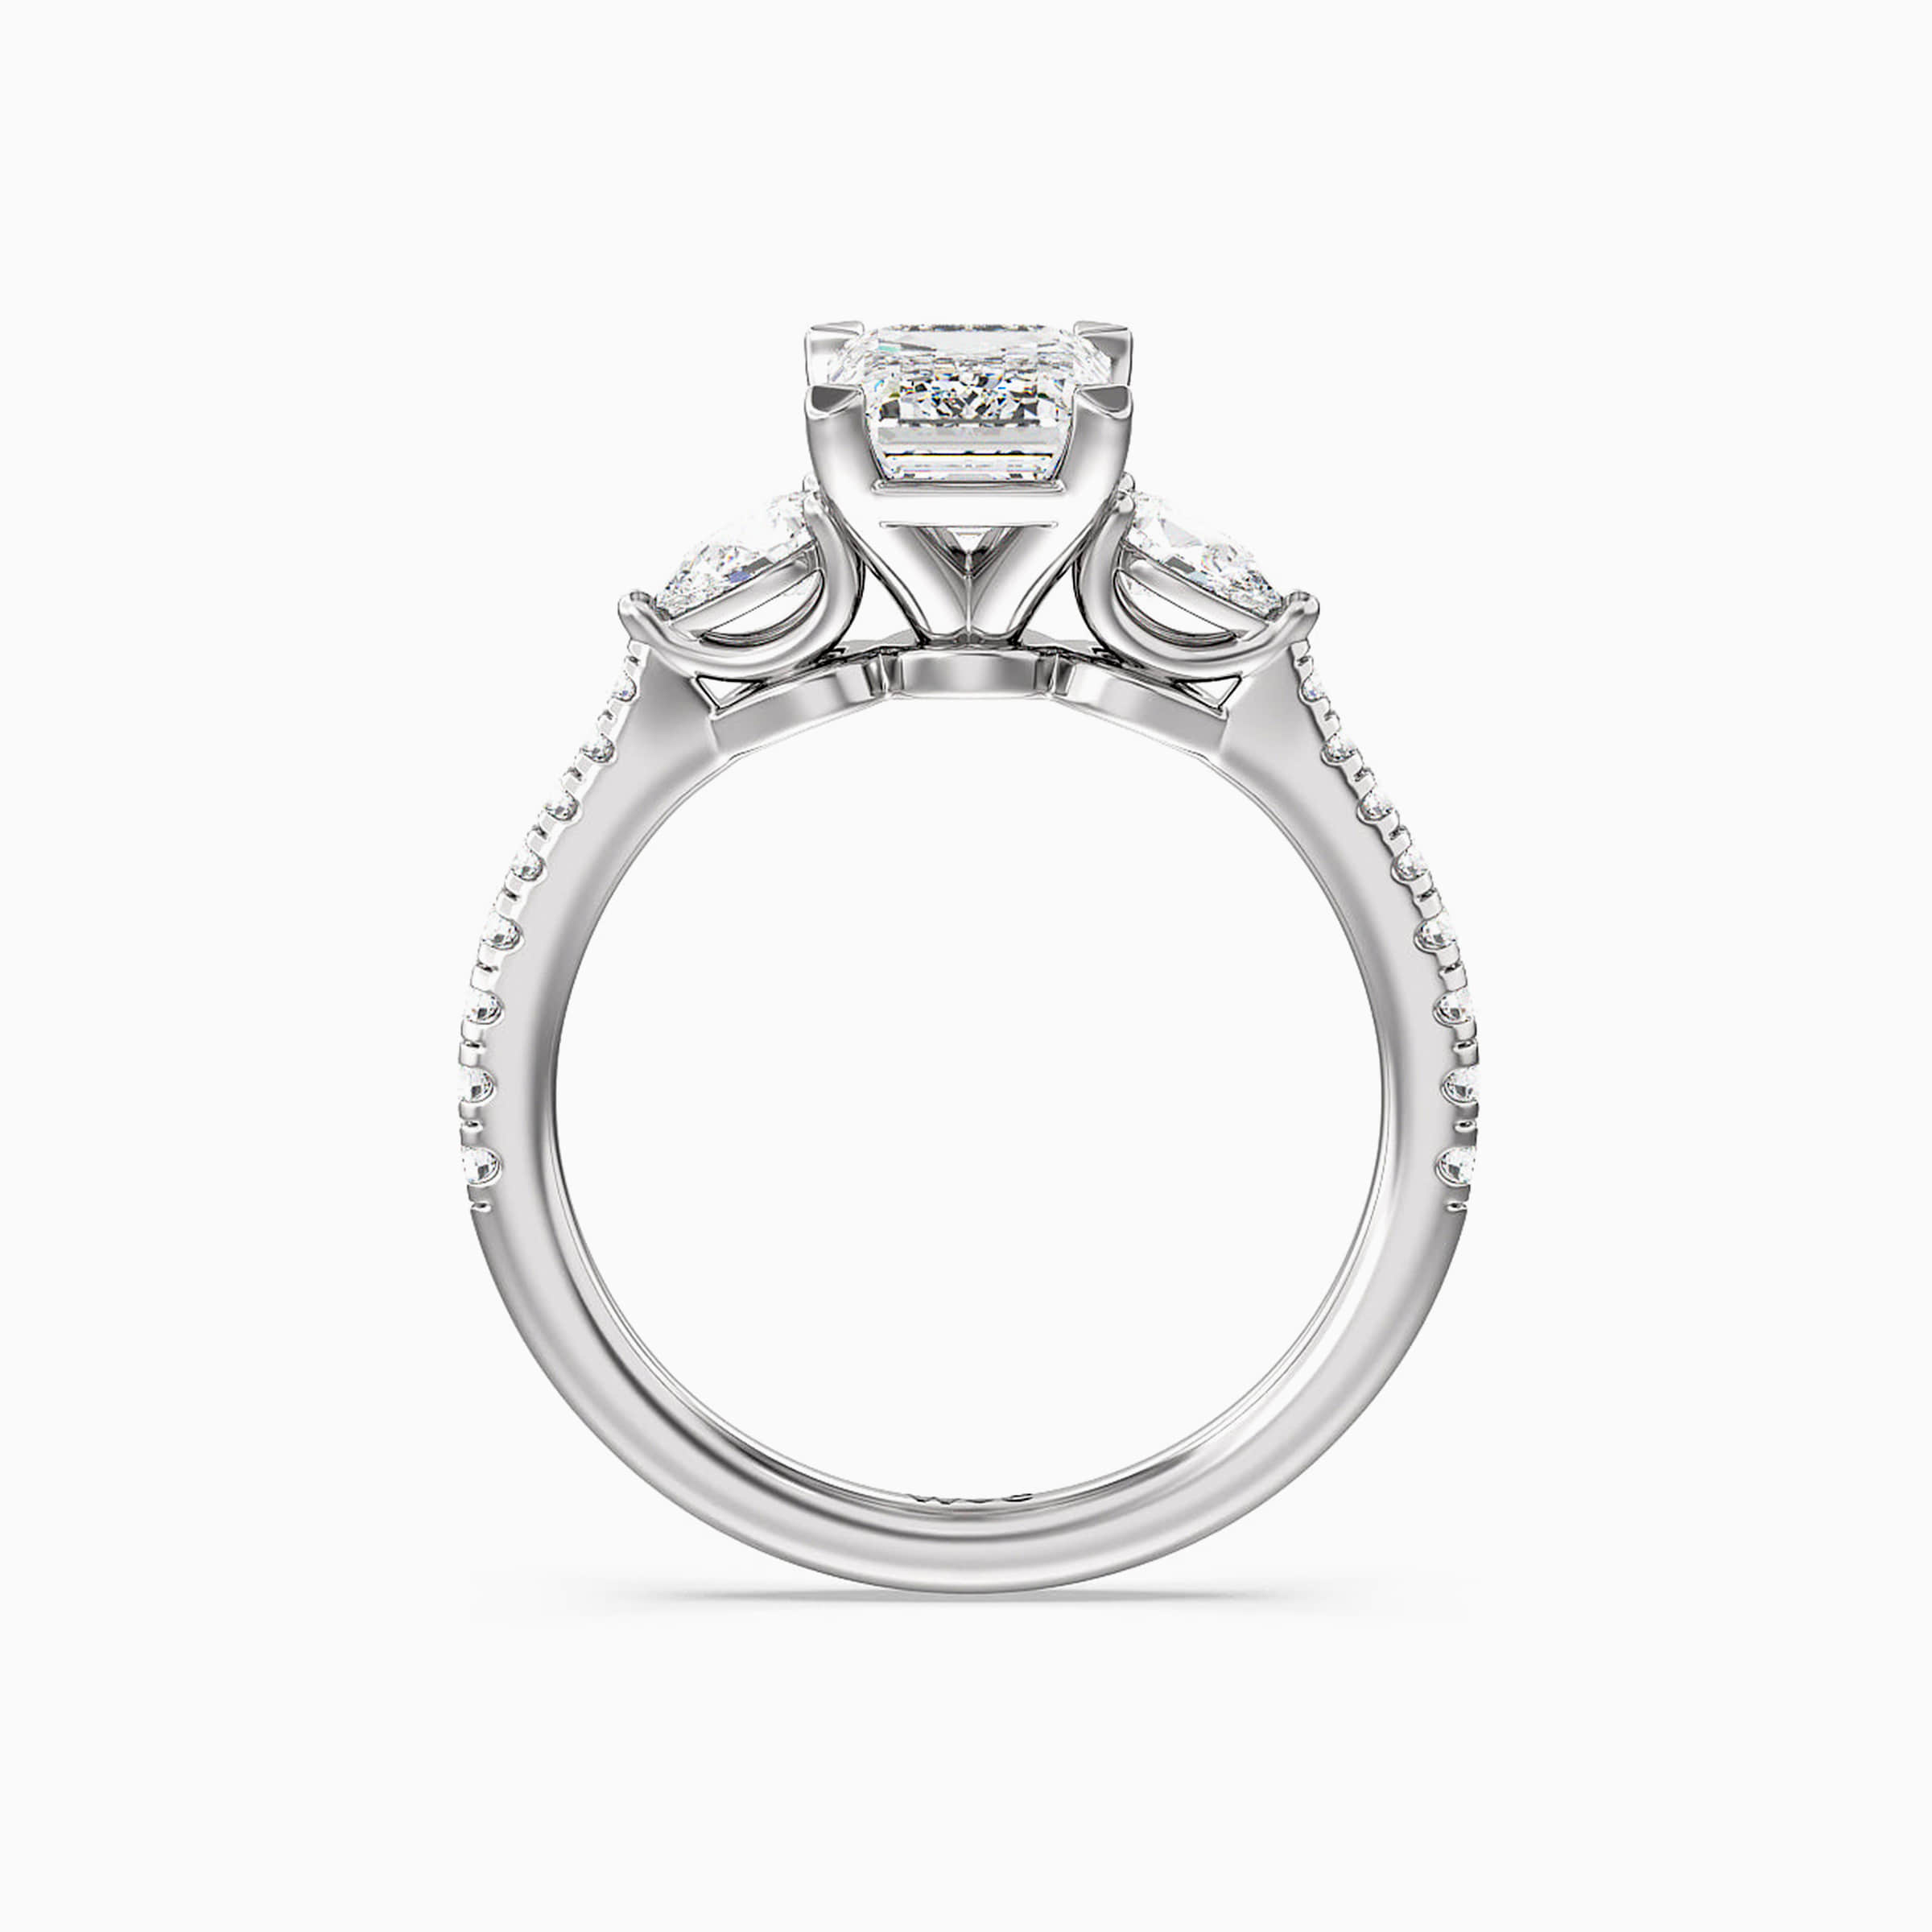 Darry Ring three stone emerald cut engagement ring front view